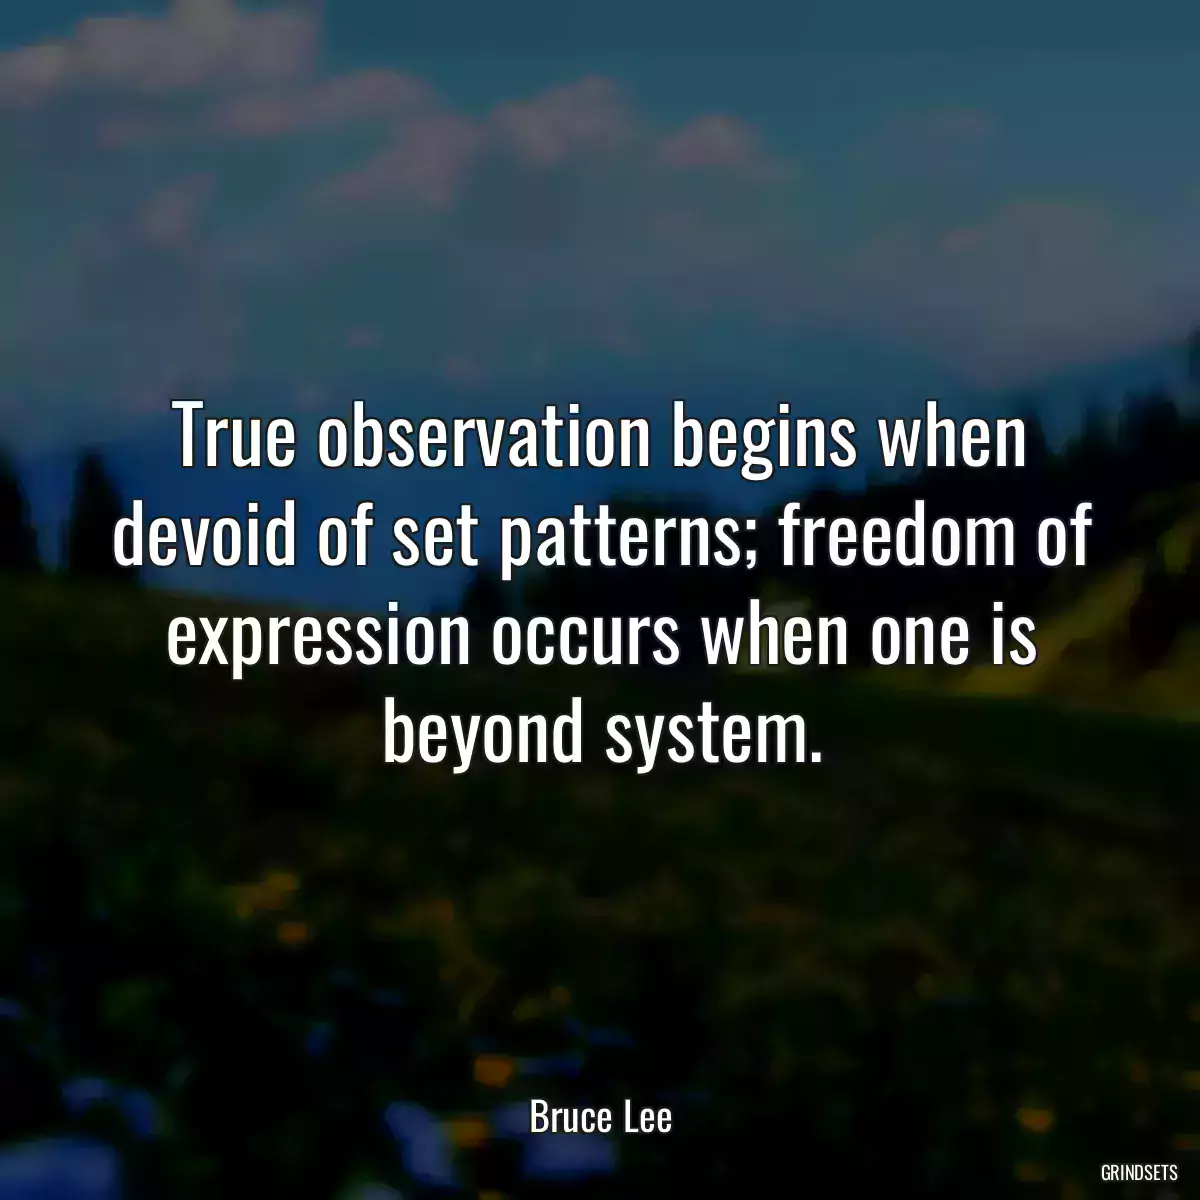 True observation begins when devoid of set patterns; freedom of expression occurs when one is beyond system.